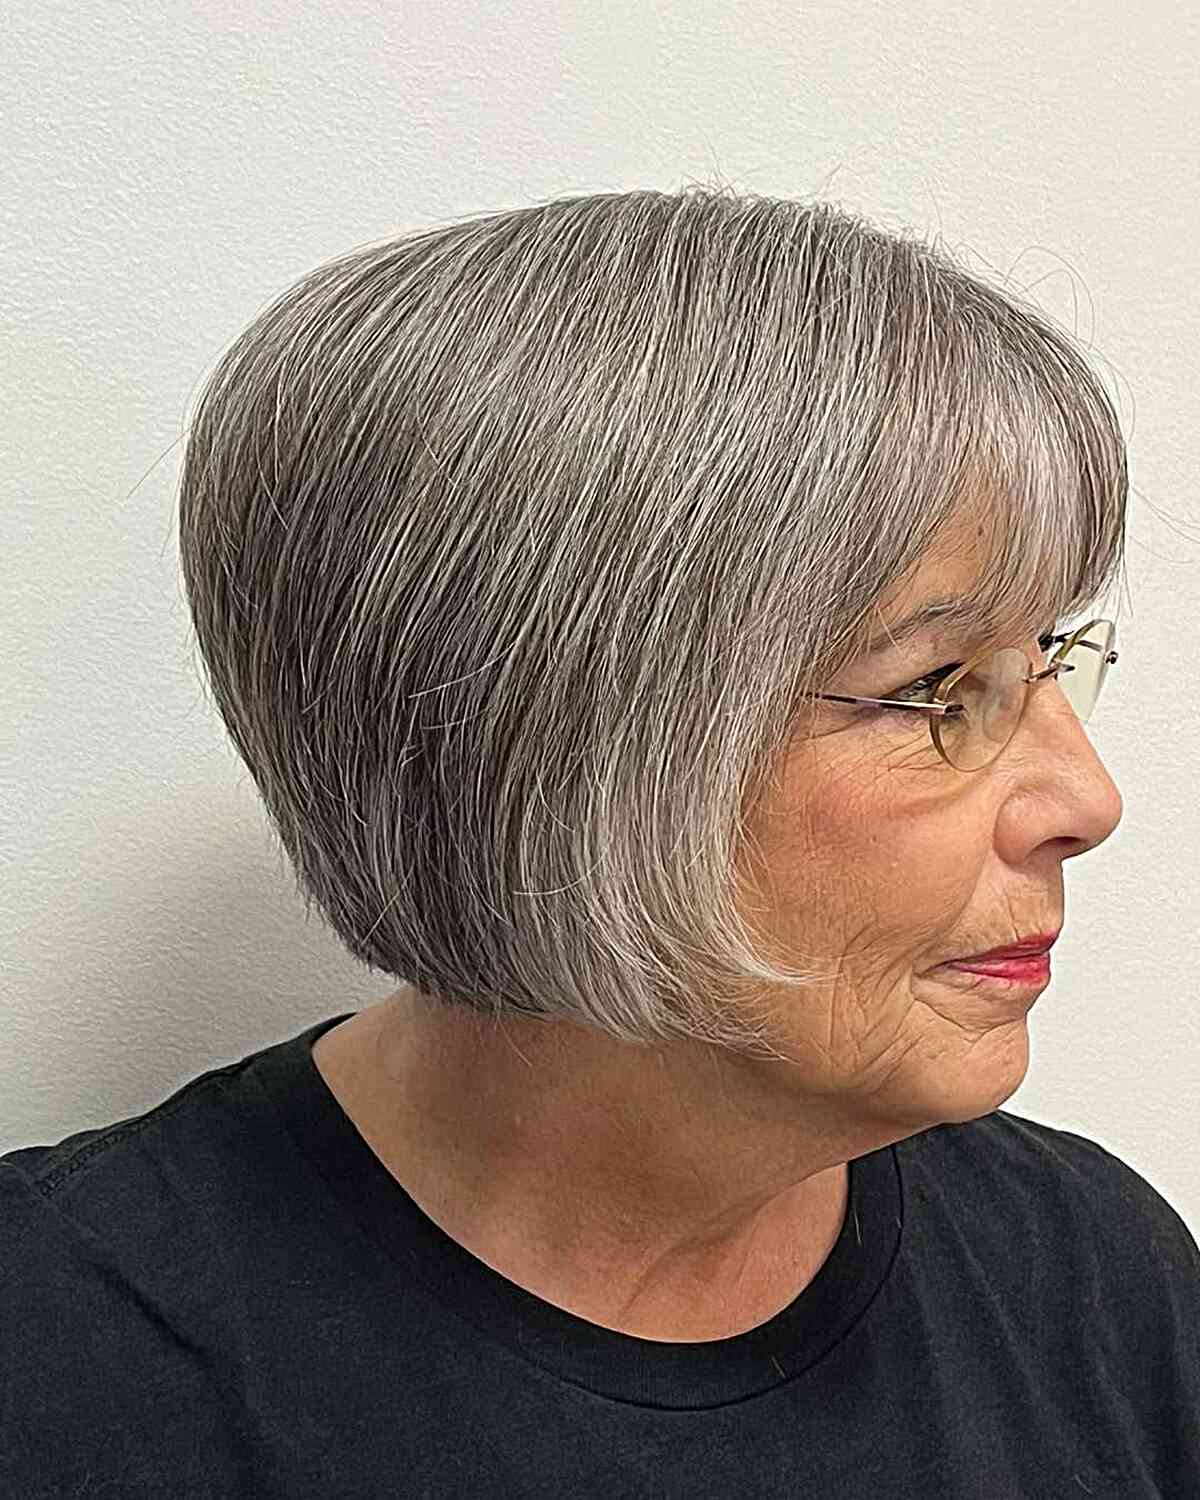 Short great hairstyle for women over 60 with glasses